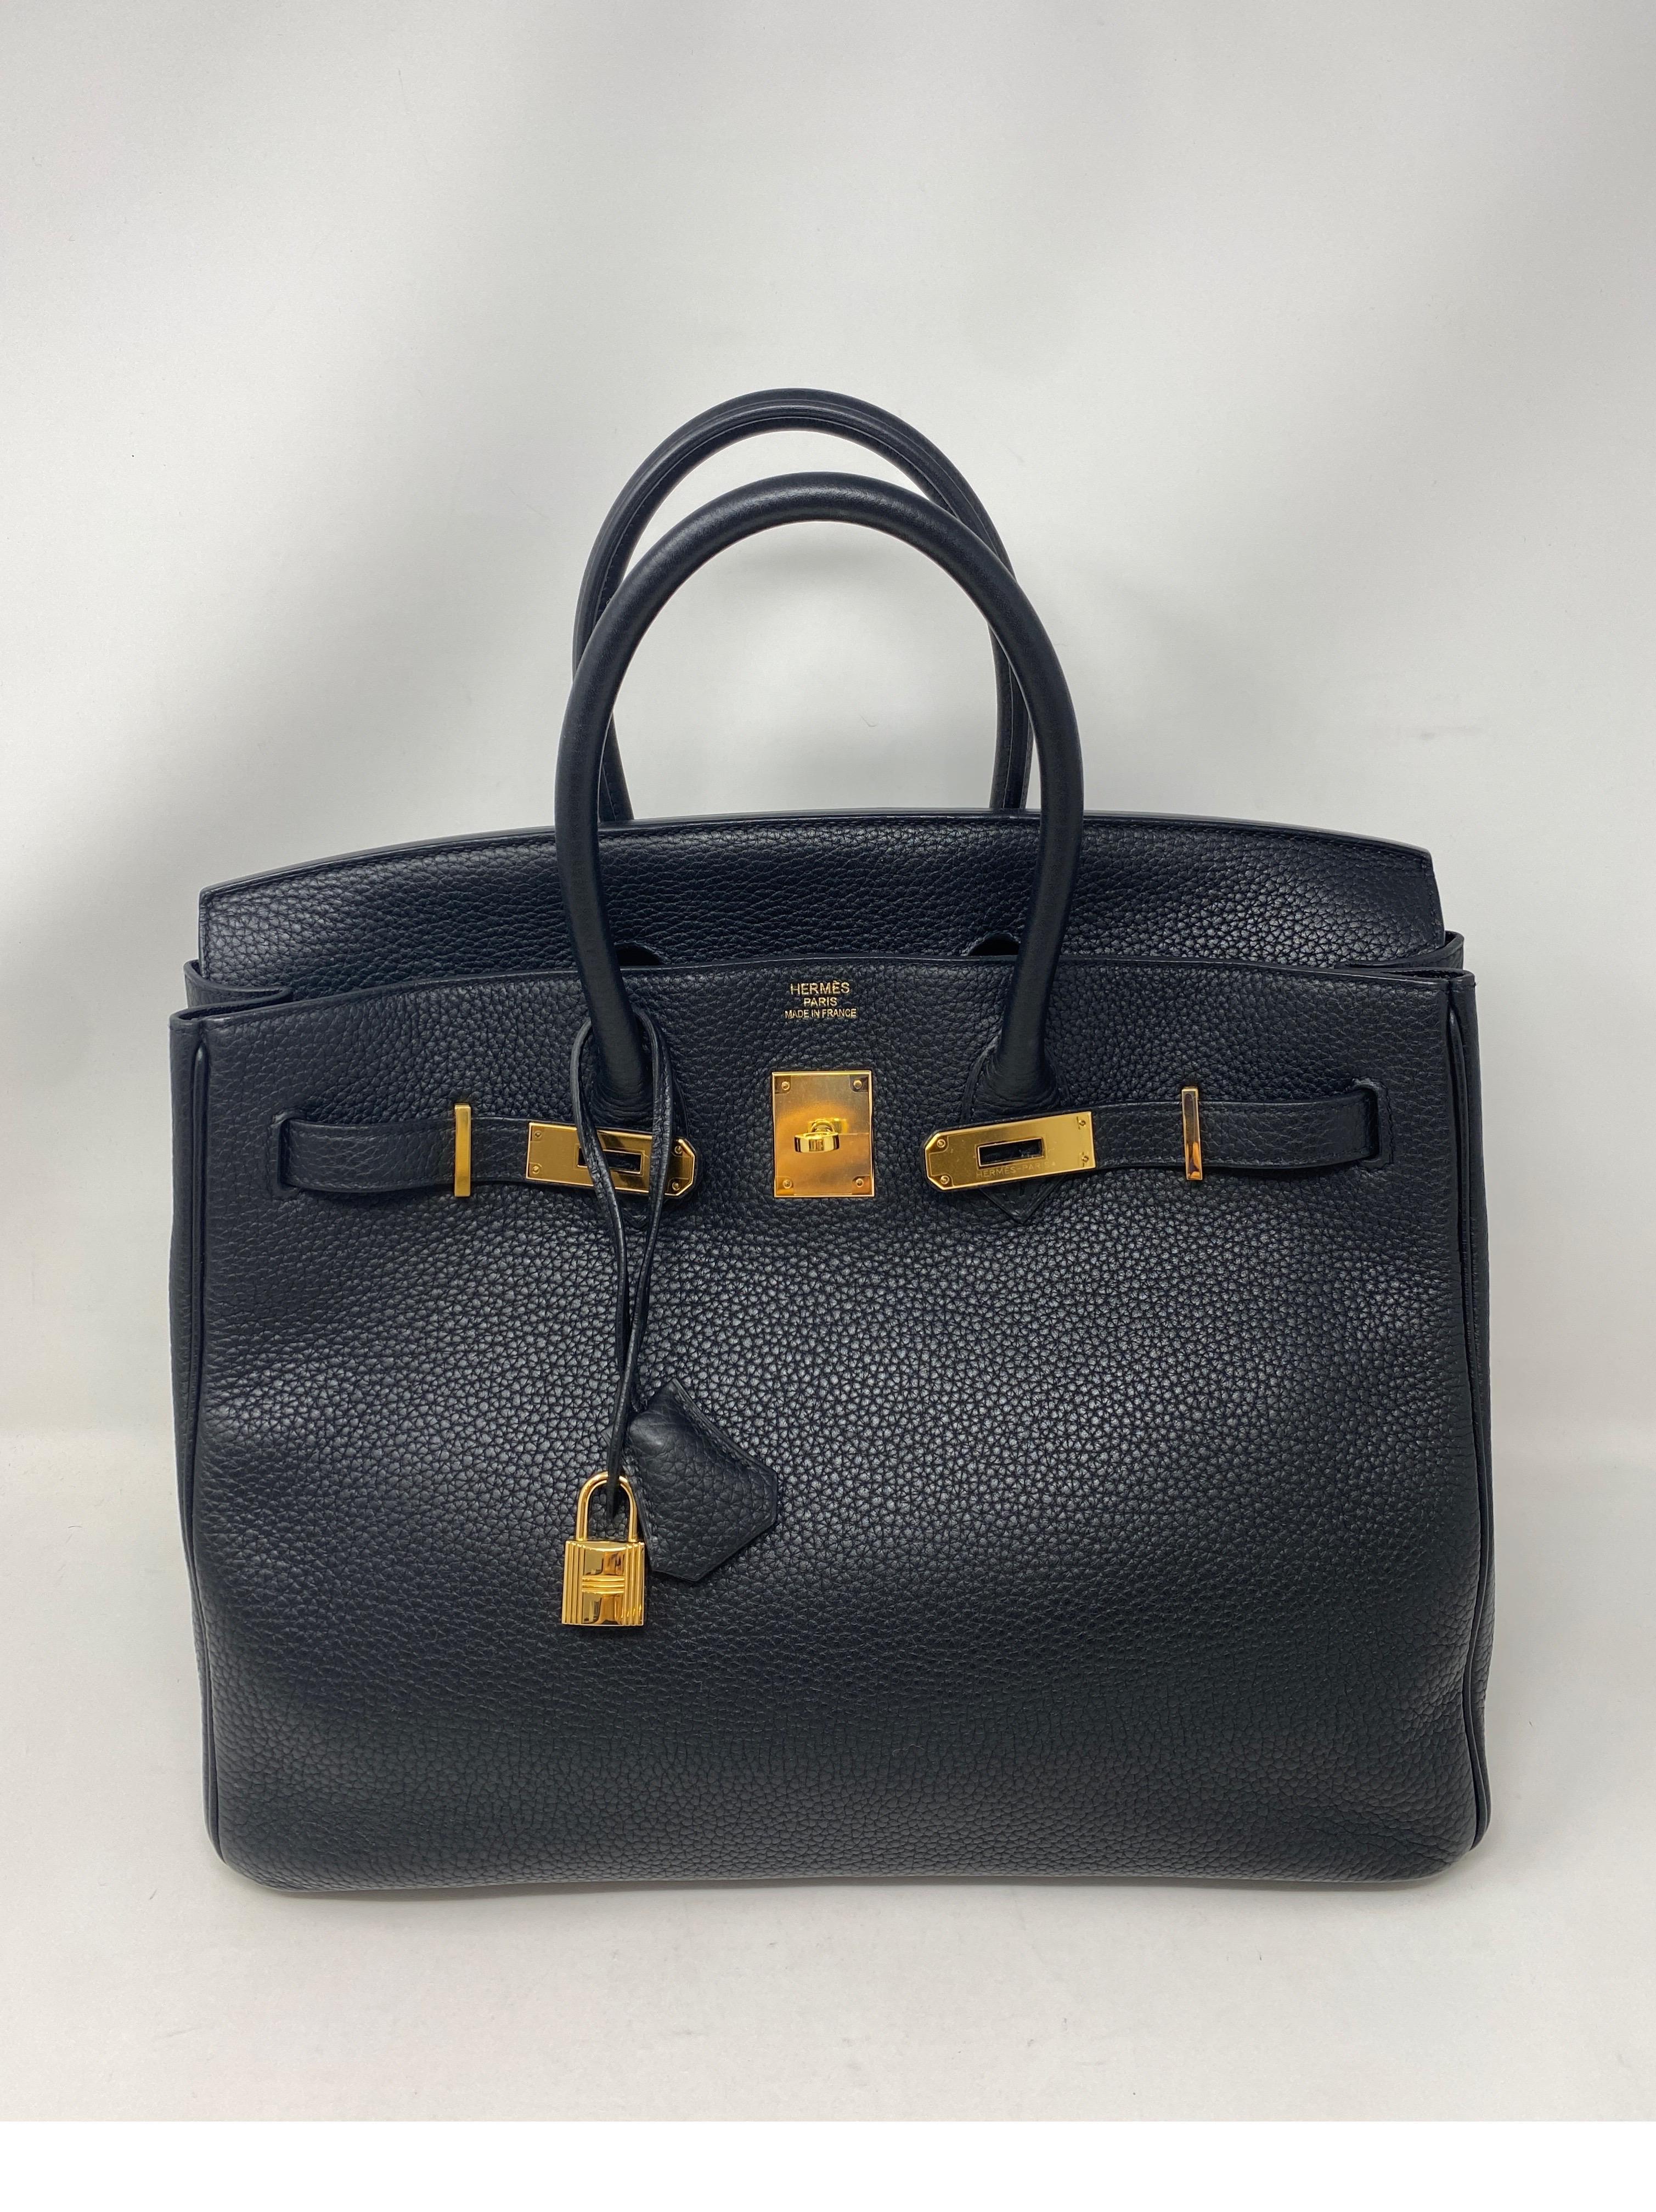 Hermes Black Birkin 35 Bag. Gold hardware. The most wanted combo. Excellent condition. Invest in the best. Don't miss out. Includes clochette, lock, keys, and dust cover. Guaranteed authentic. 